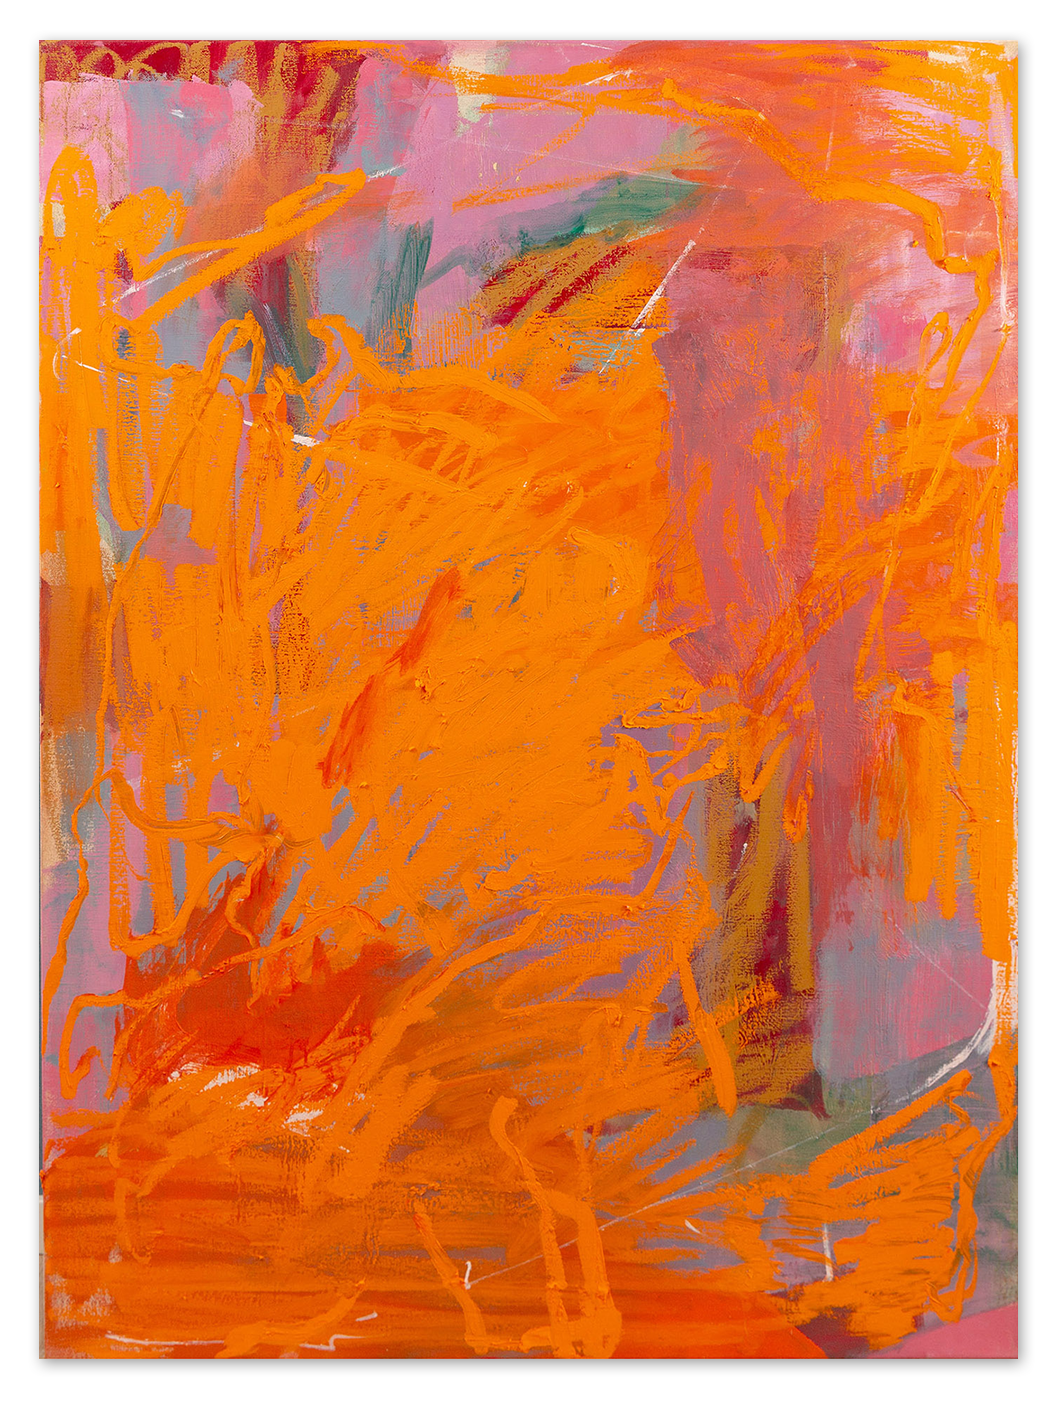 An abstract oil painting in orange, ochre and white